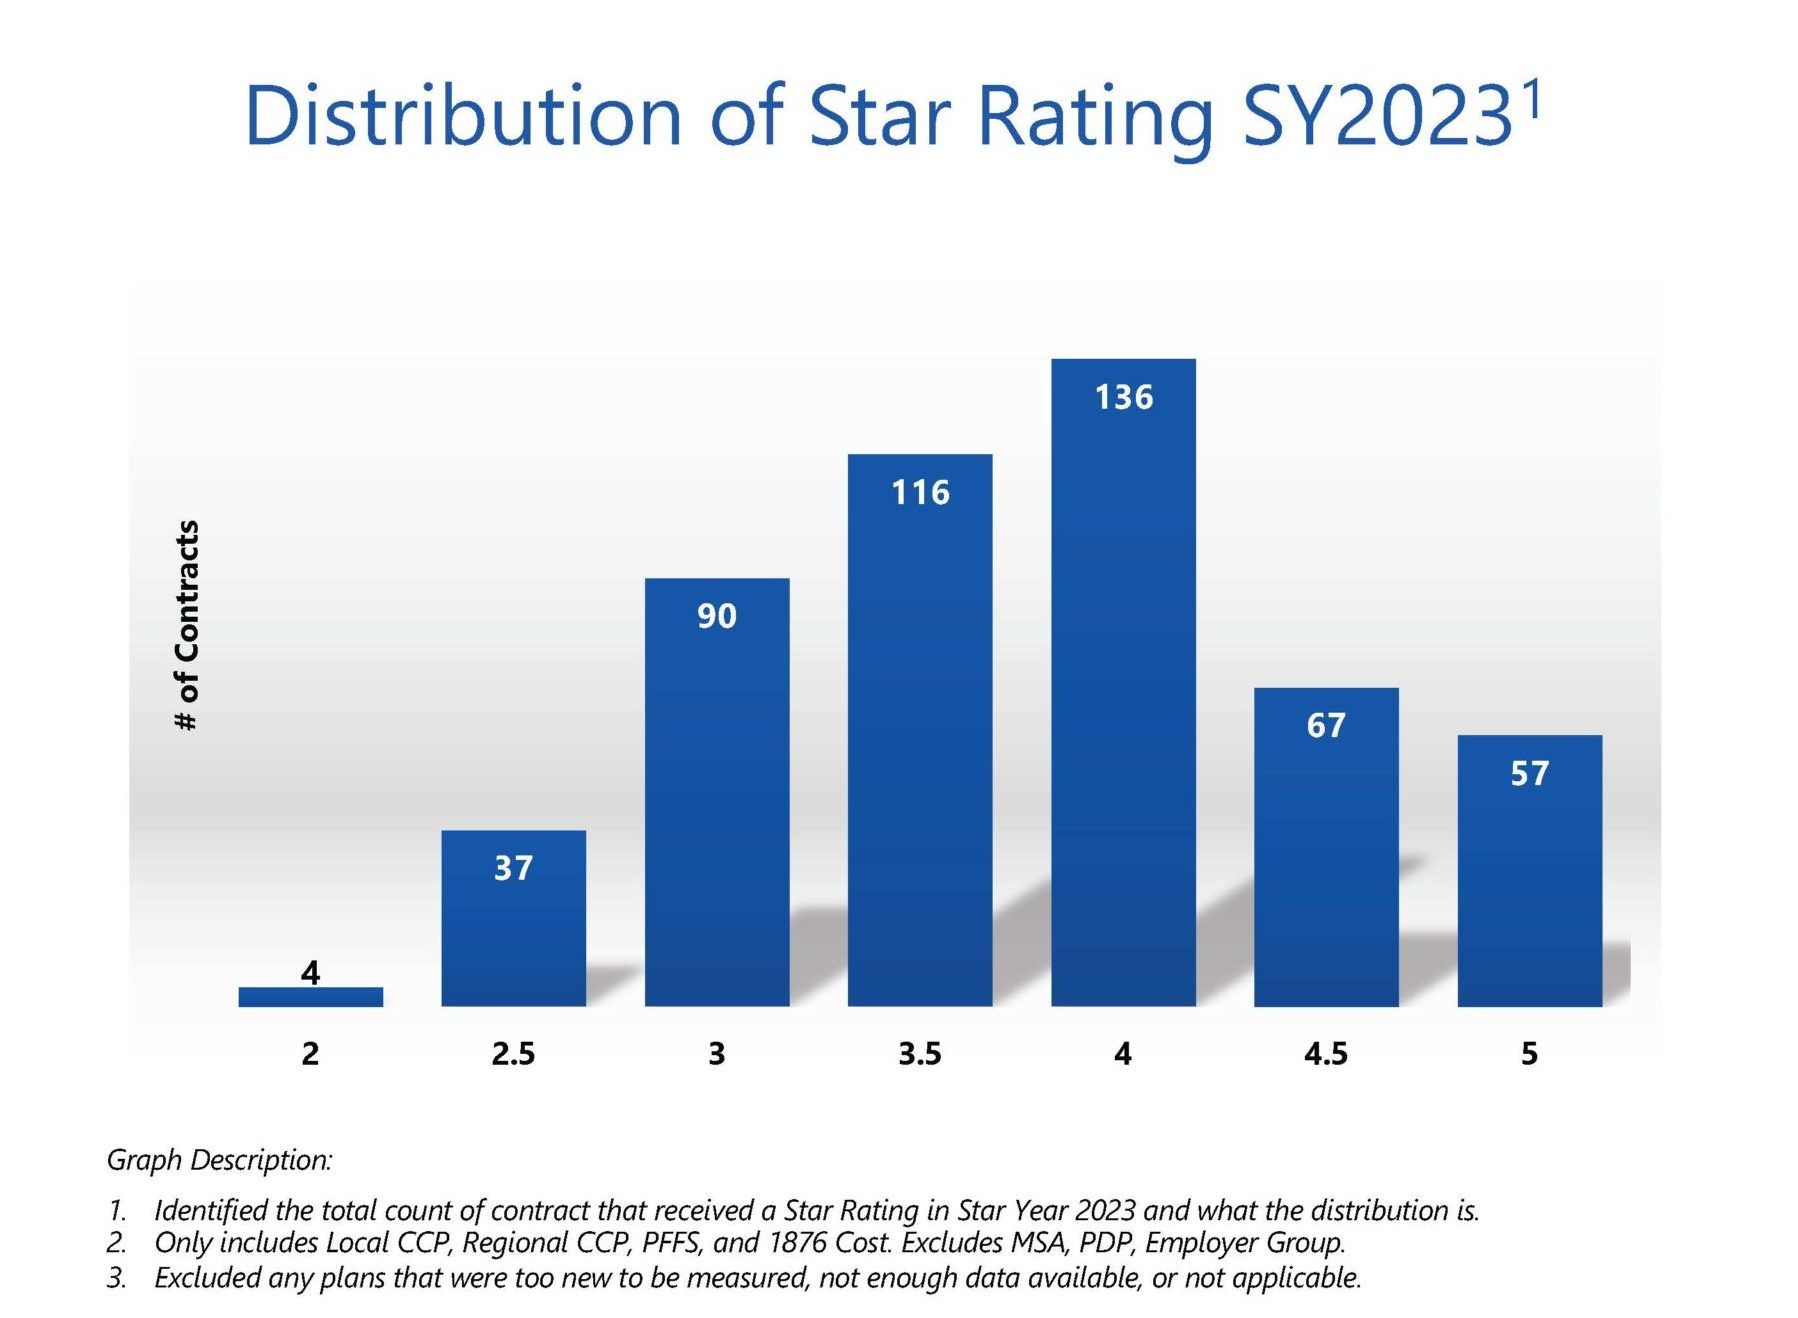 Distribution of Star Rating SY 2023